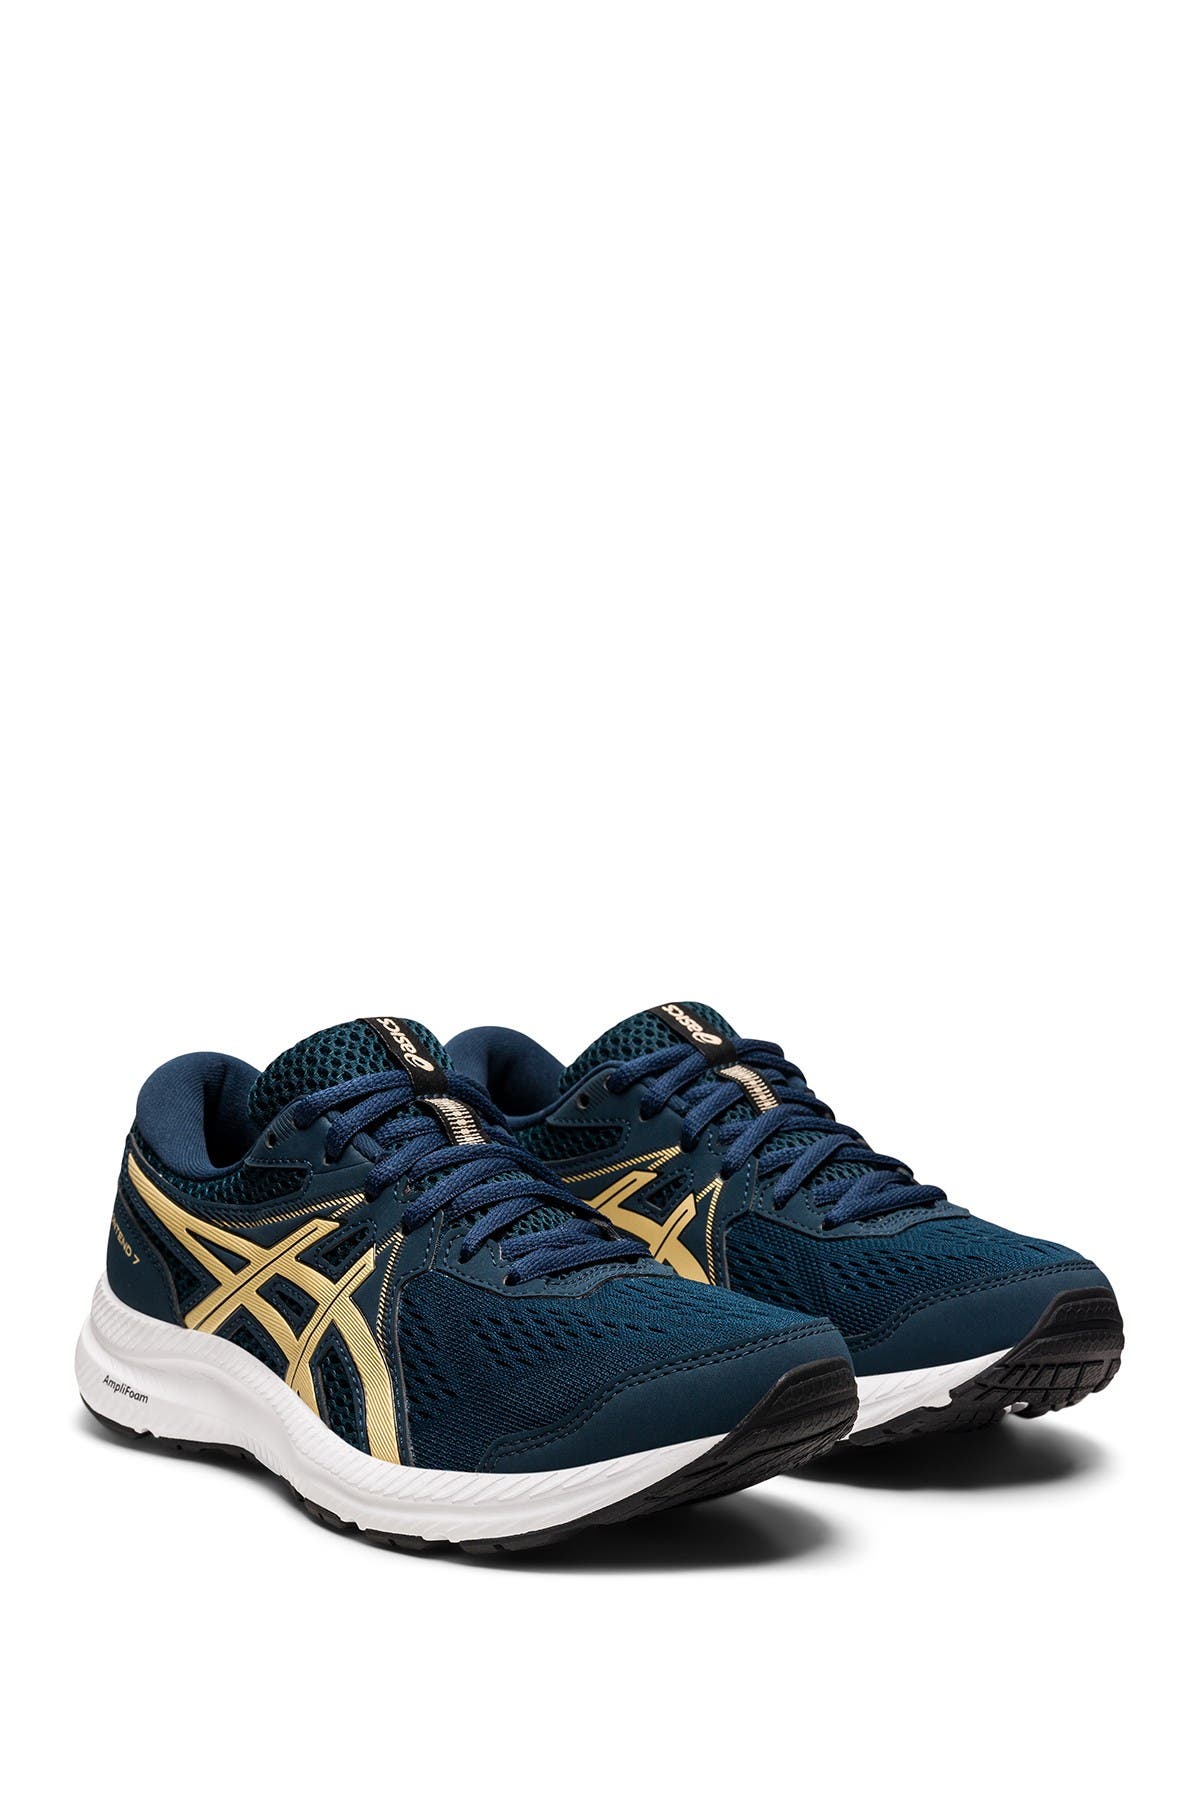 Asics Gel-contend 7 Sneaker In French Blue/champagne